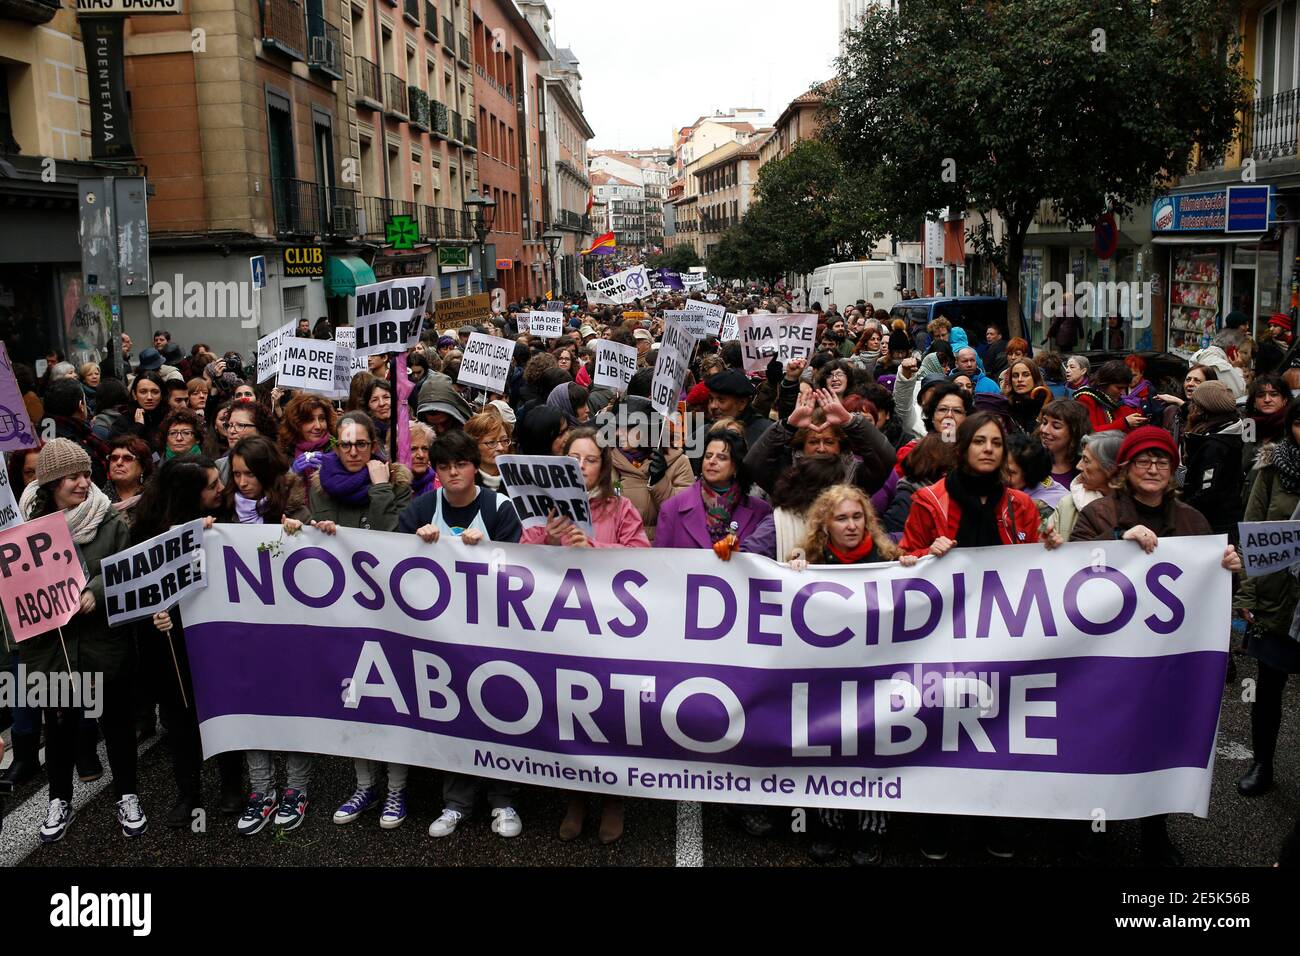 Thousands of people march to protest a government plan to limit abortions in Madrid February 8, 2014. Demonstrators march through Madrid to demand that the government ends its plan to reform Spain's abortion law. The government of Mariano Rajoy has proposed to make abortion more restrictive, sparking controversy amongst different sectors of society including the ruling People's Party. Banner reads 'We decided. Free Abolition' REUTERS/Javier Barbancho (SPAIN - Tags: CIVIL UNREST POLITICS HEALTH) Stock Photo